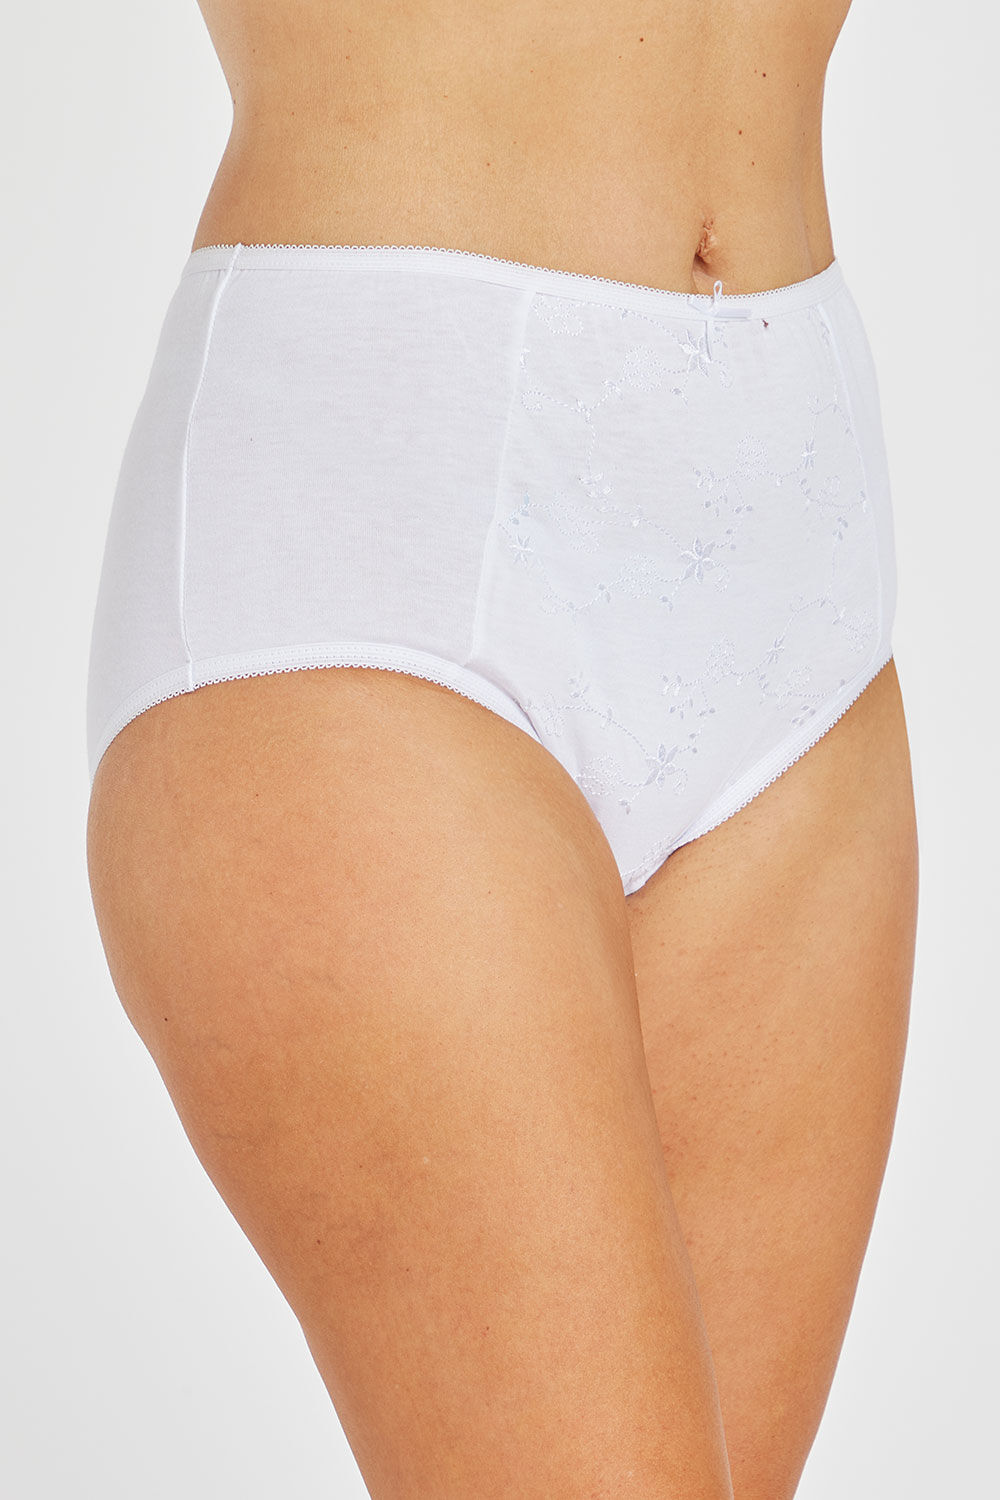 Bonmarche White Cotton Full Briefs With Embroidered Detail, Size: 12-14